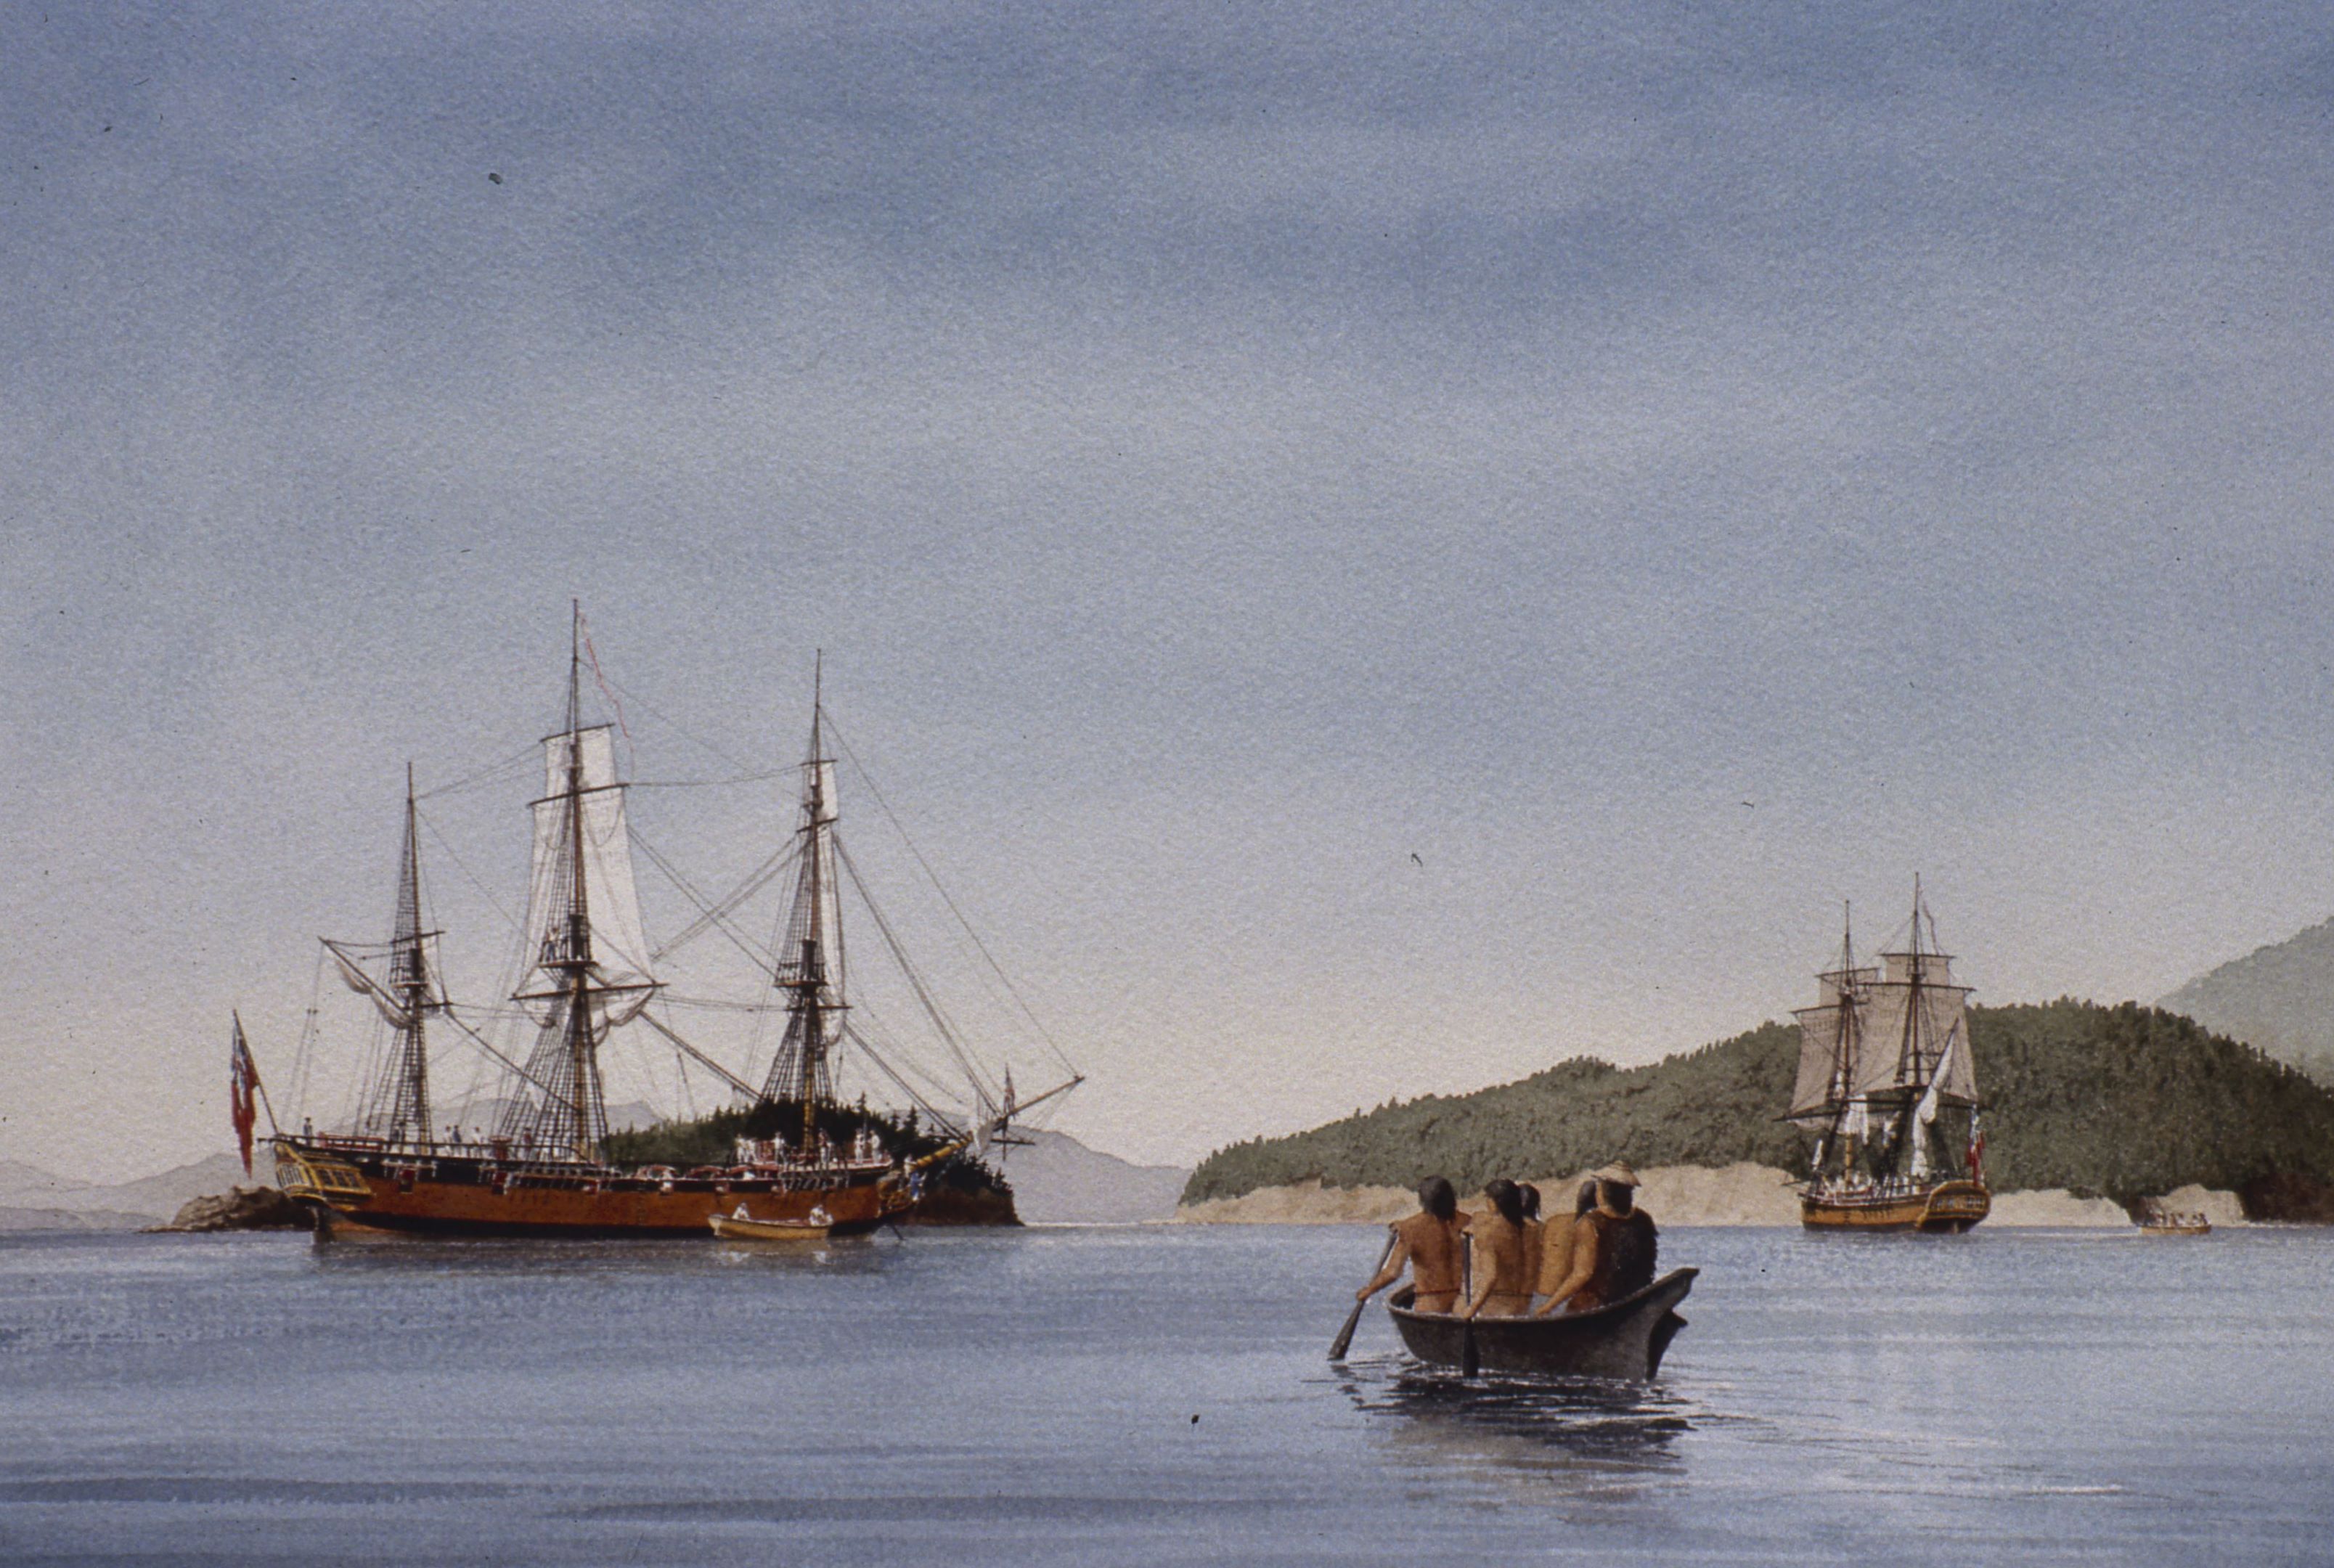 H.M.S. DISCOVERY and CHATHAM